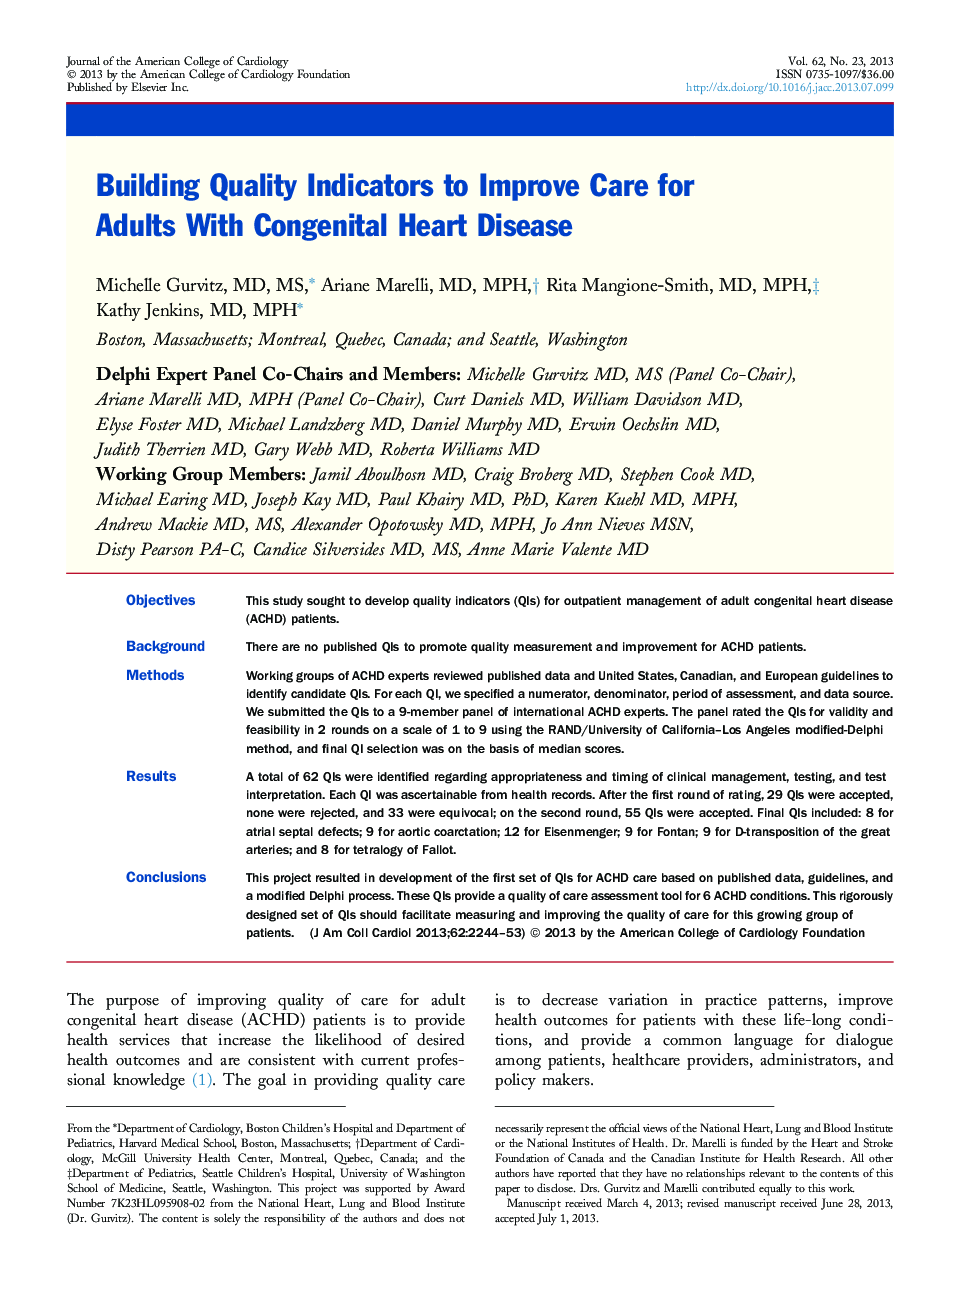 Building Quality Indicators to Improve Care for Adults With Congenital Heart Disease 